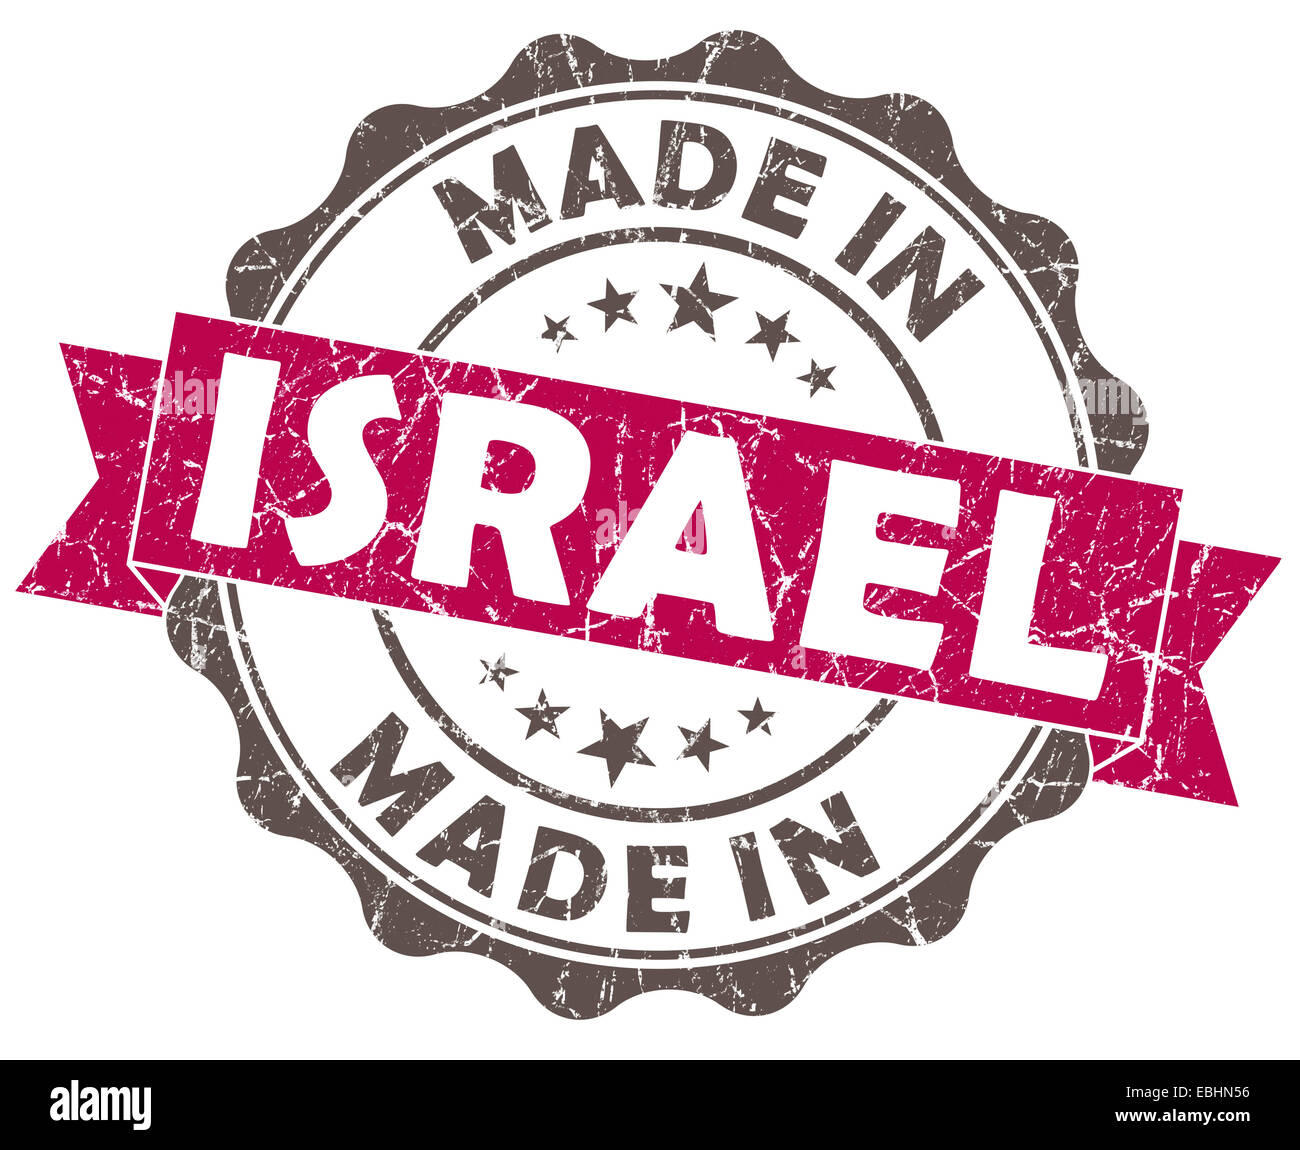 Made in ISRAEL rosa Grunge Dichtung Stockfoto